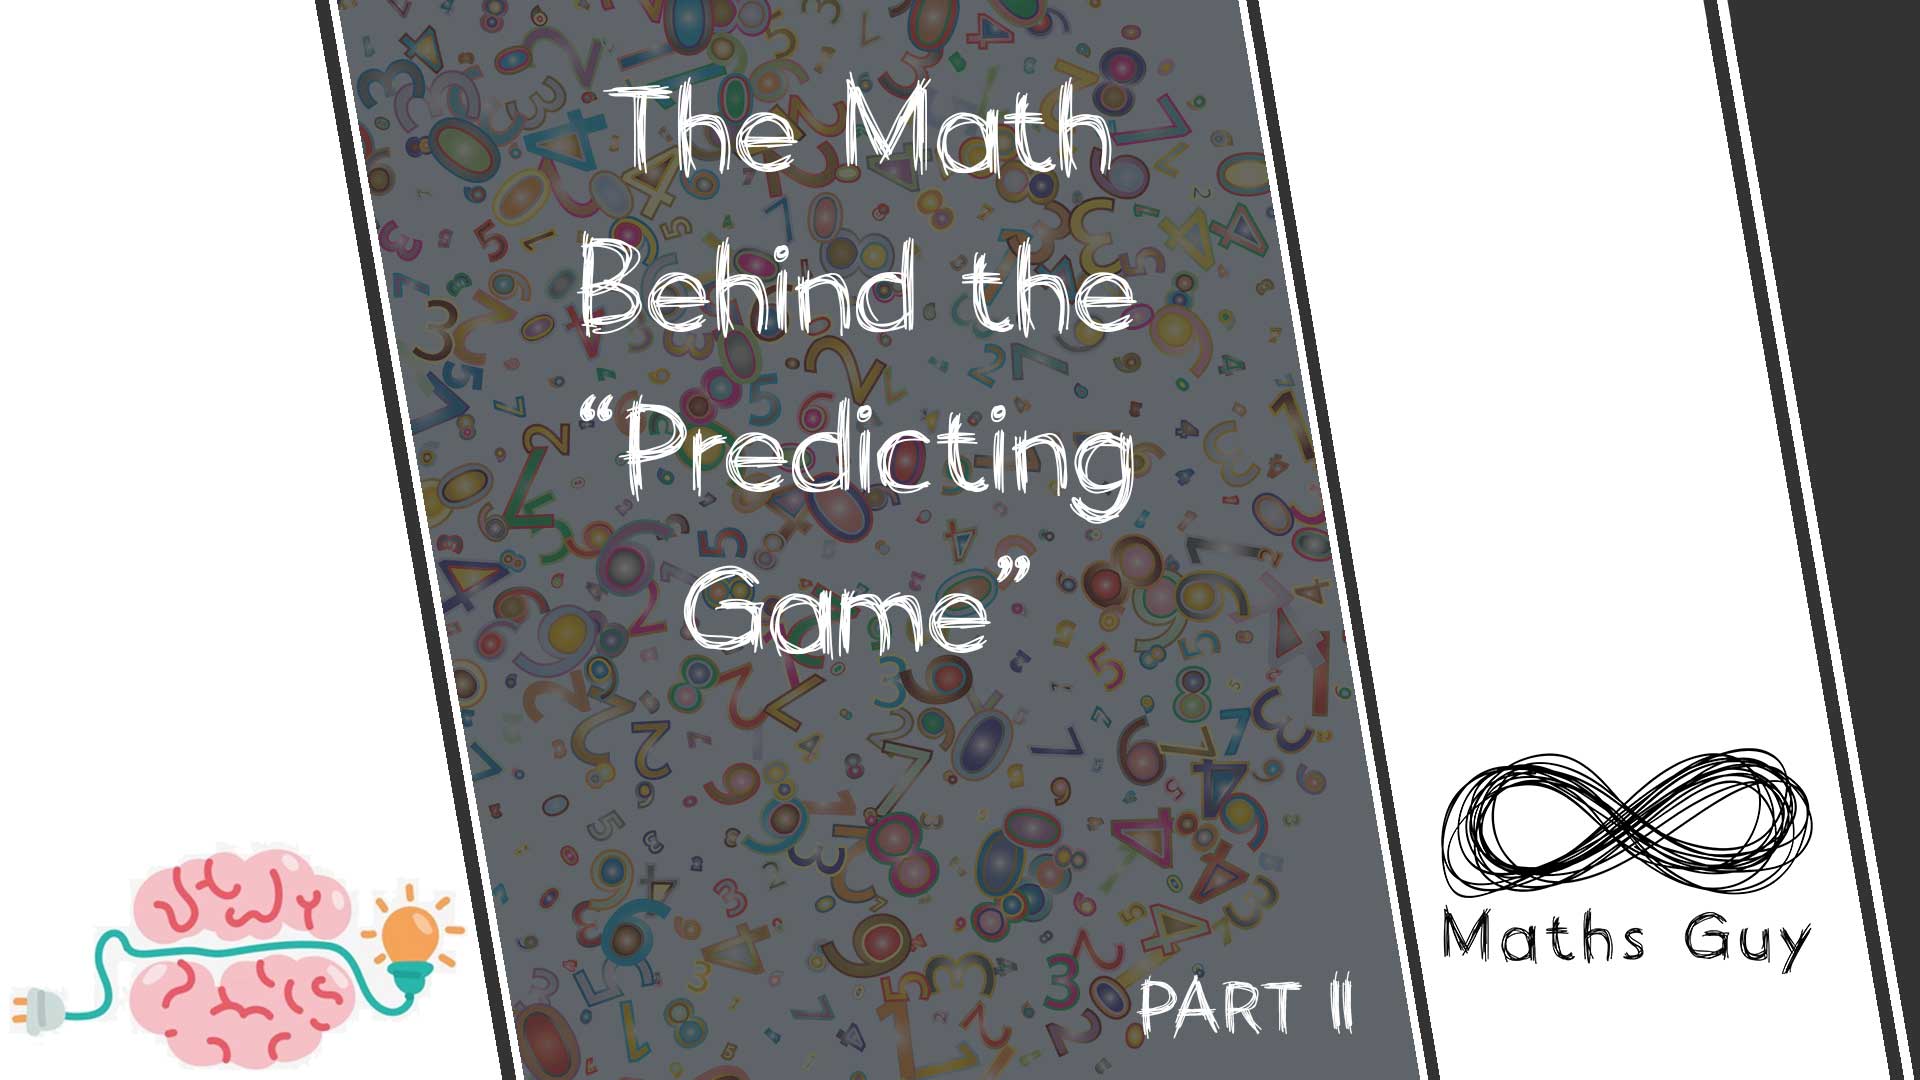 The math behind the predicting game